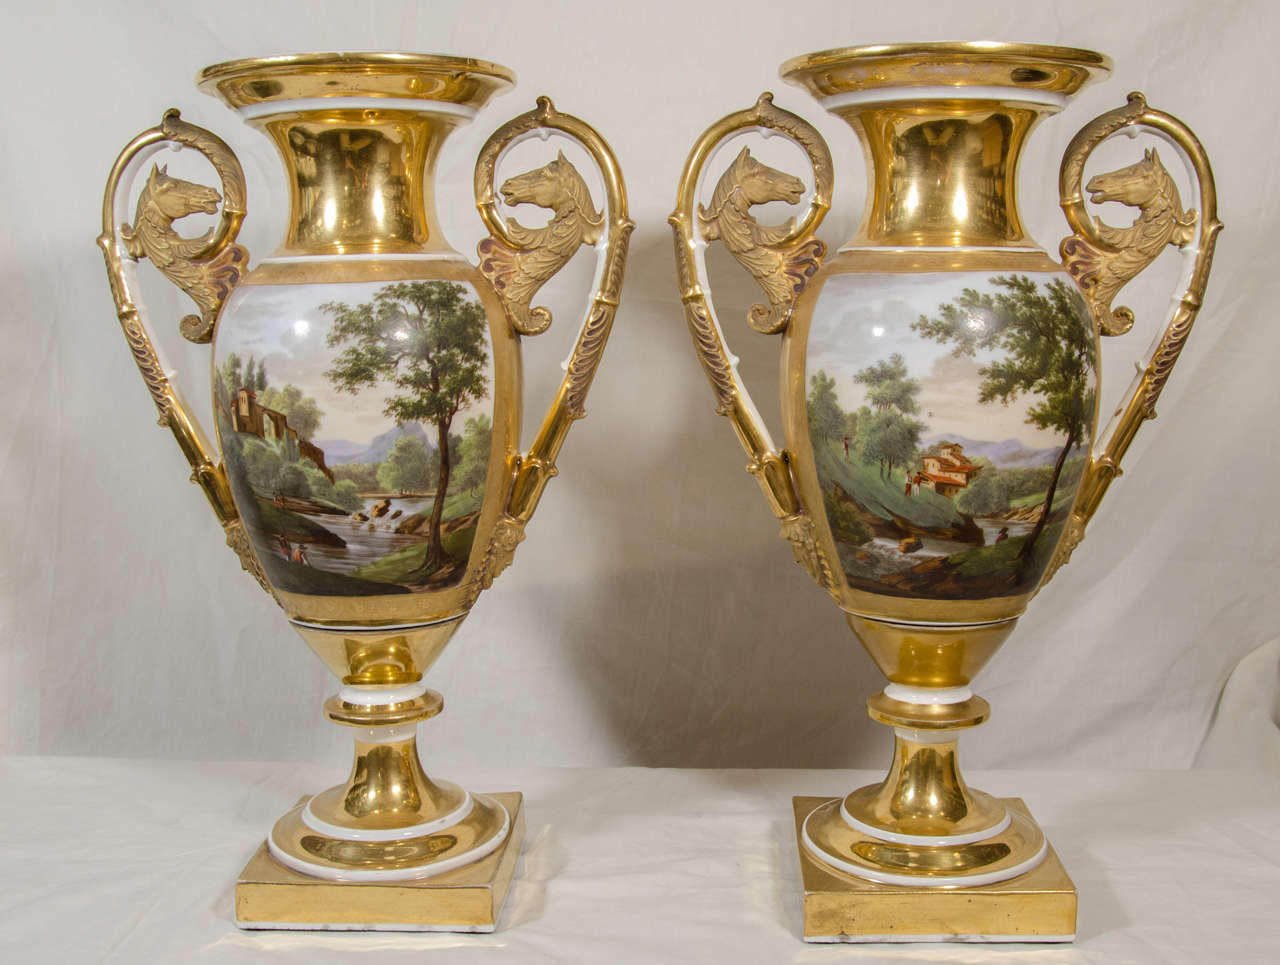 A pair of gold ground porcelain vases painted with rustic figures in rural landscapes. The matte gilding of the handles emphasizes the painted reliefs. The quality of the painting and gilt decoration are characteristic of the style of the Nast